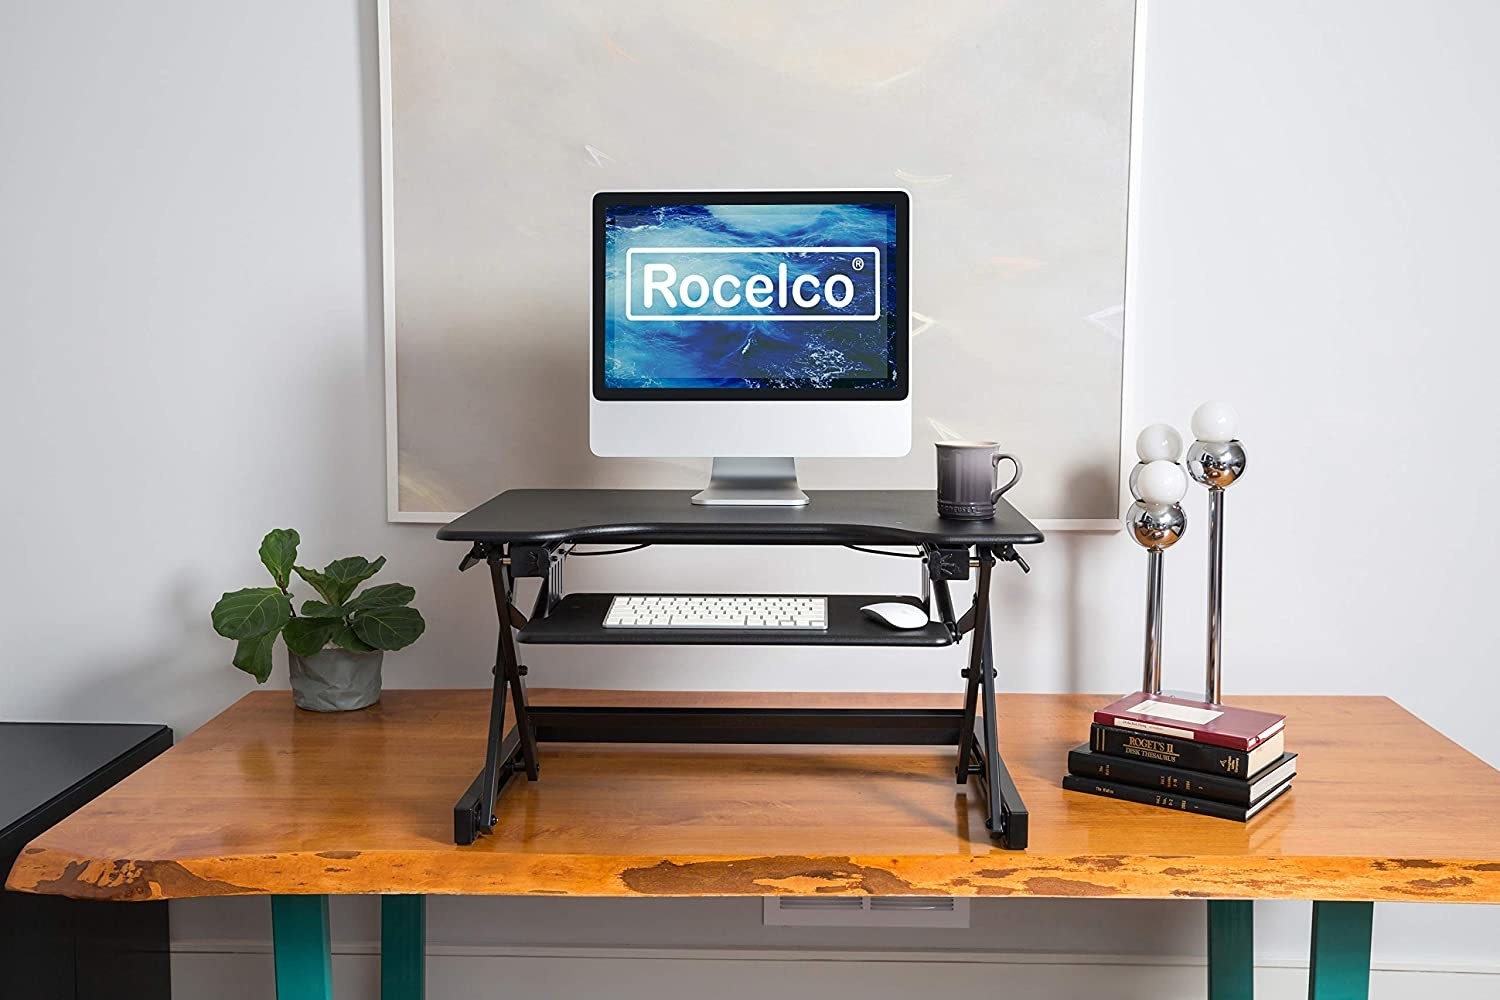 The monitor riser on a larger wooden desk with a monitor, keyboard, and mug on top of it